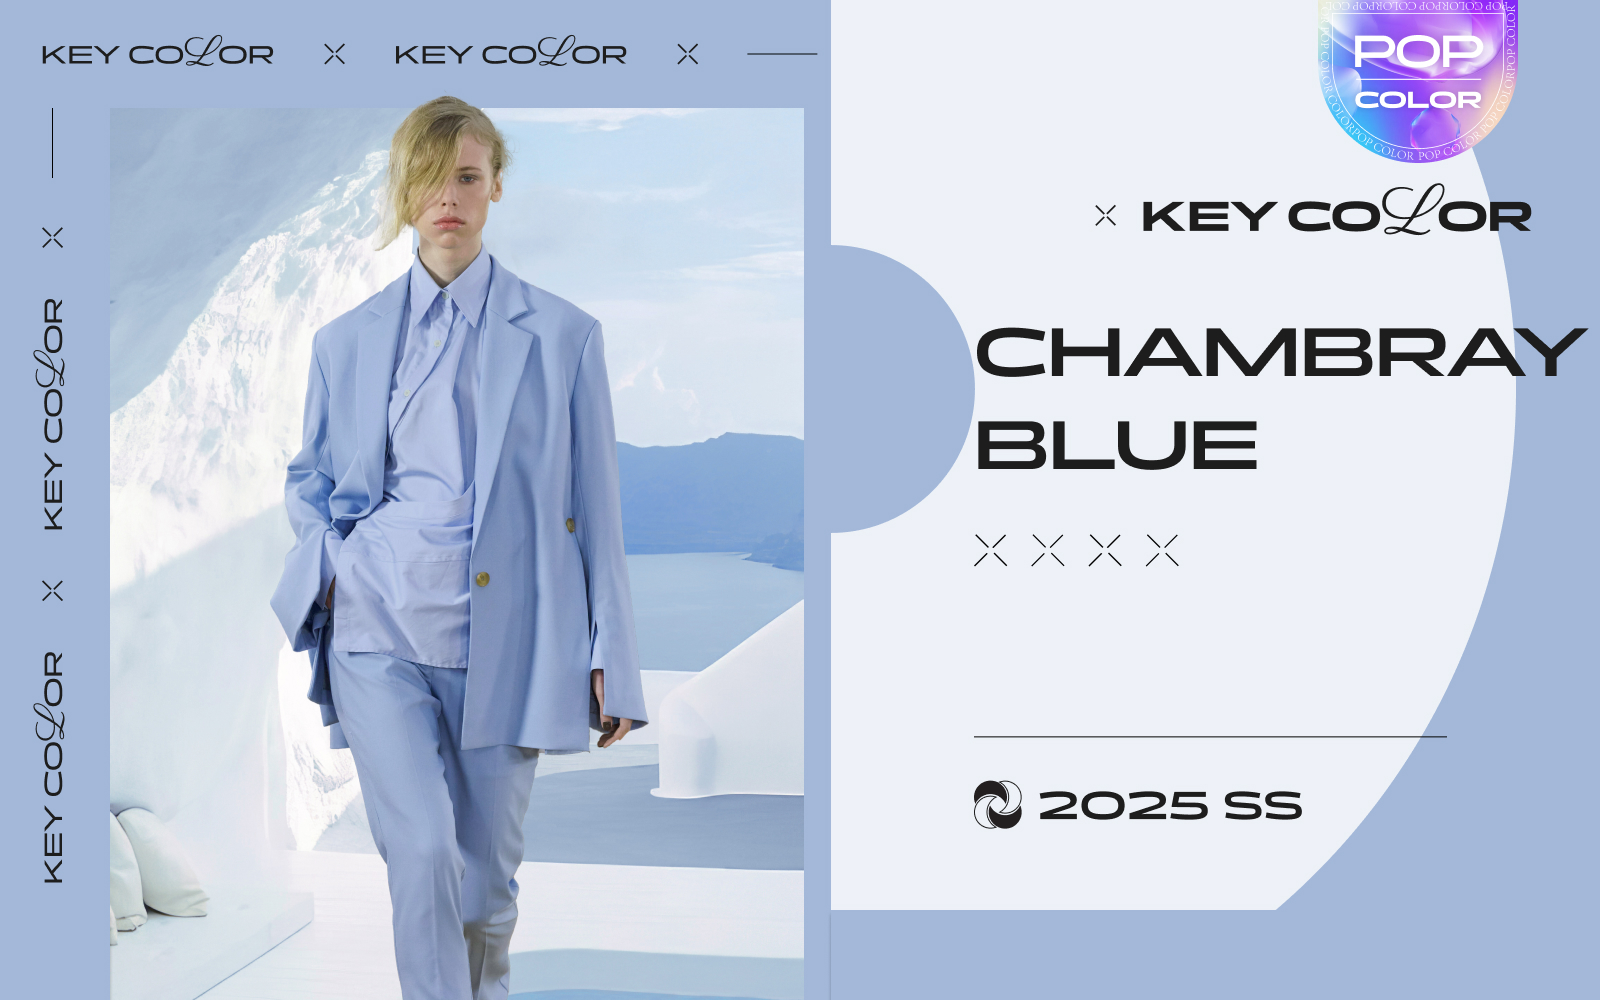 Chambray Blue -- The Color Trend for Womenswear